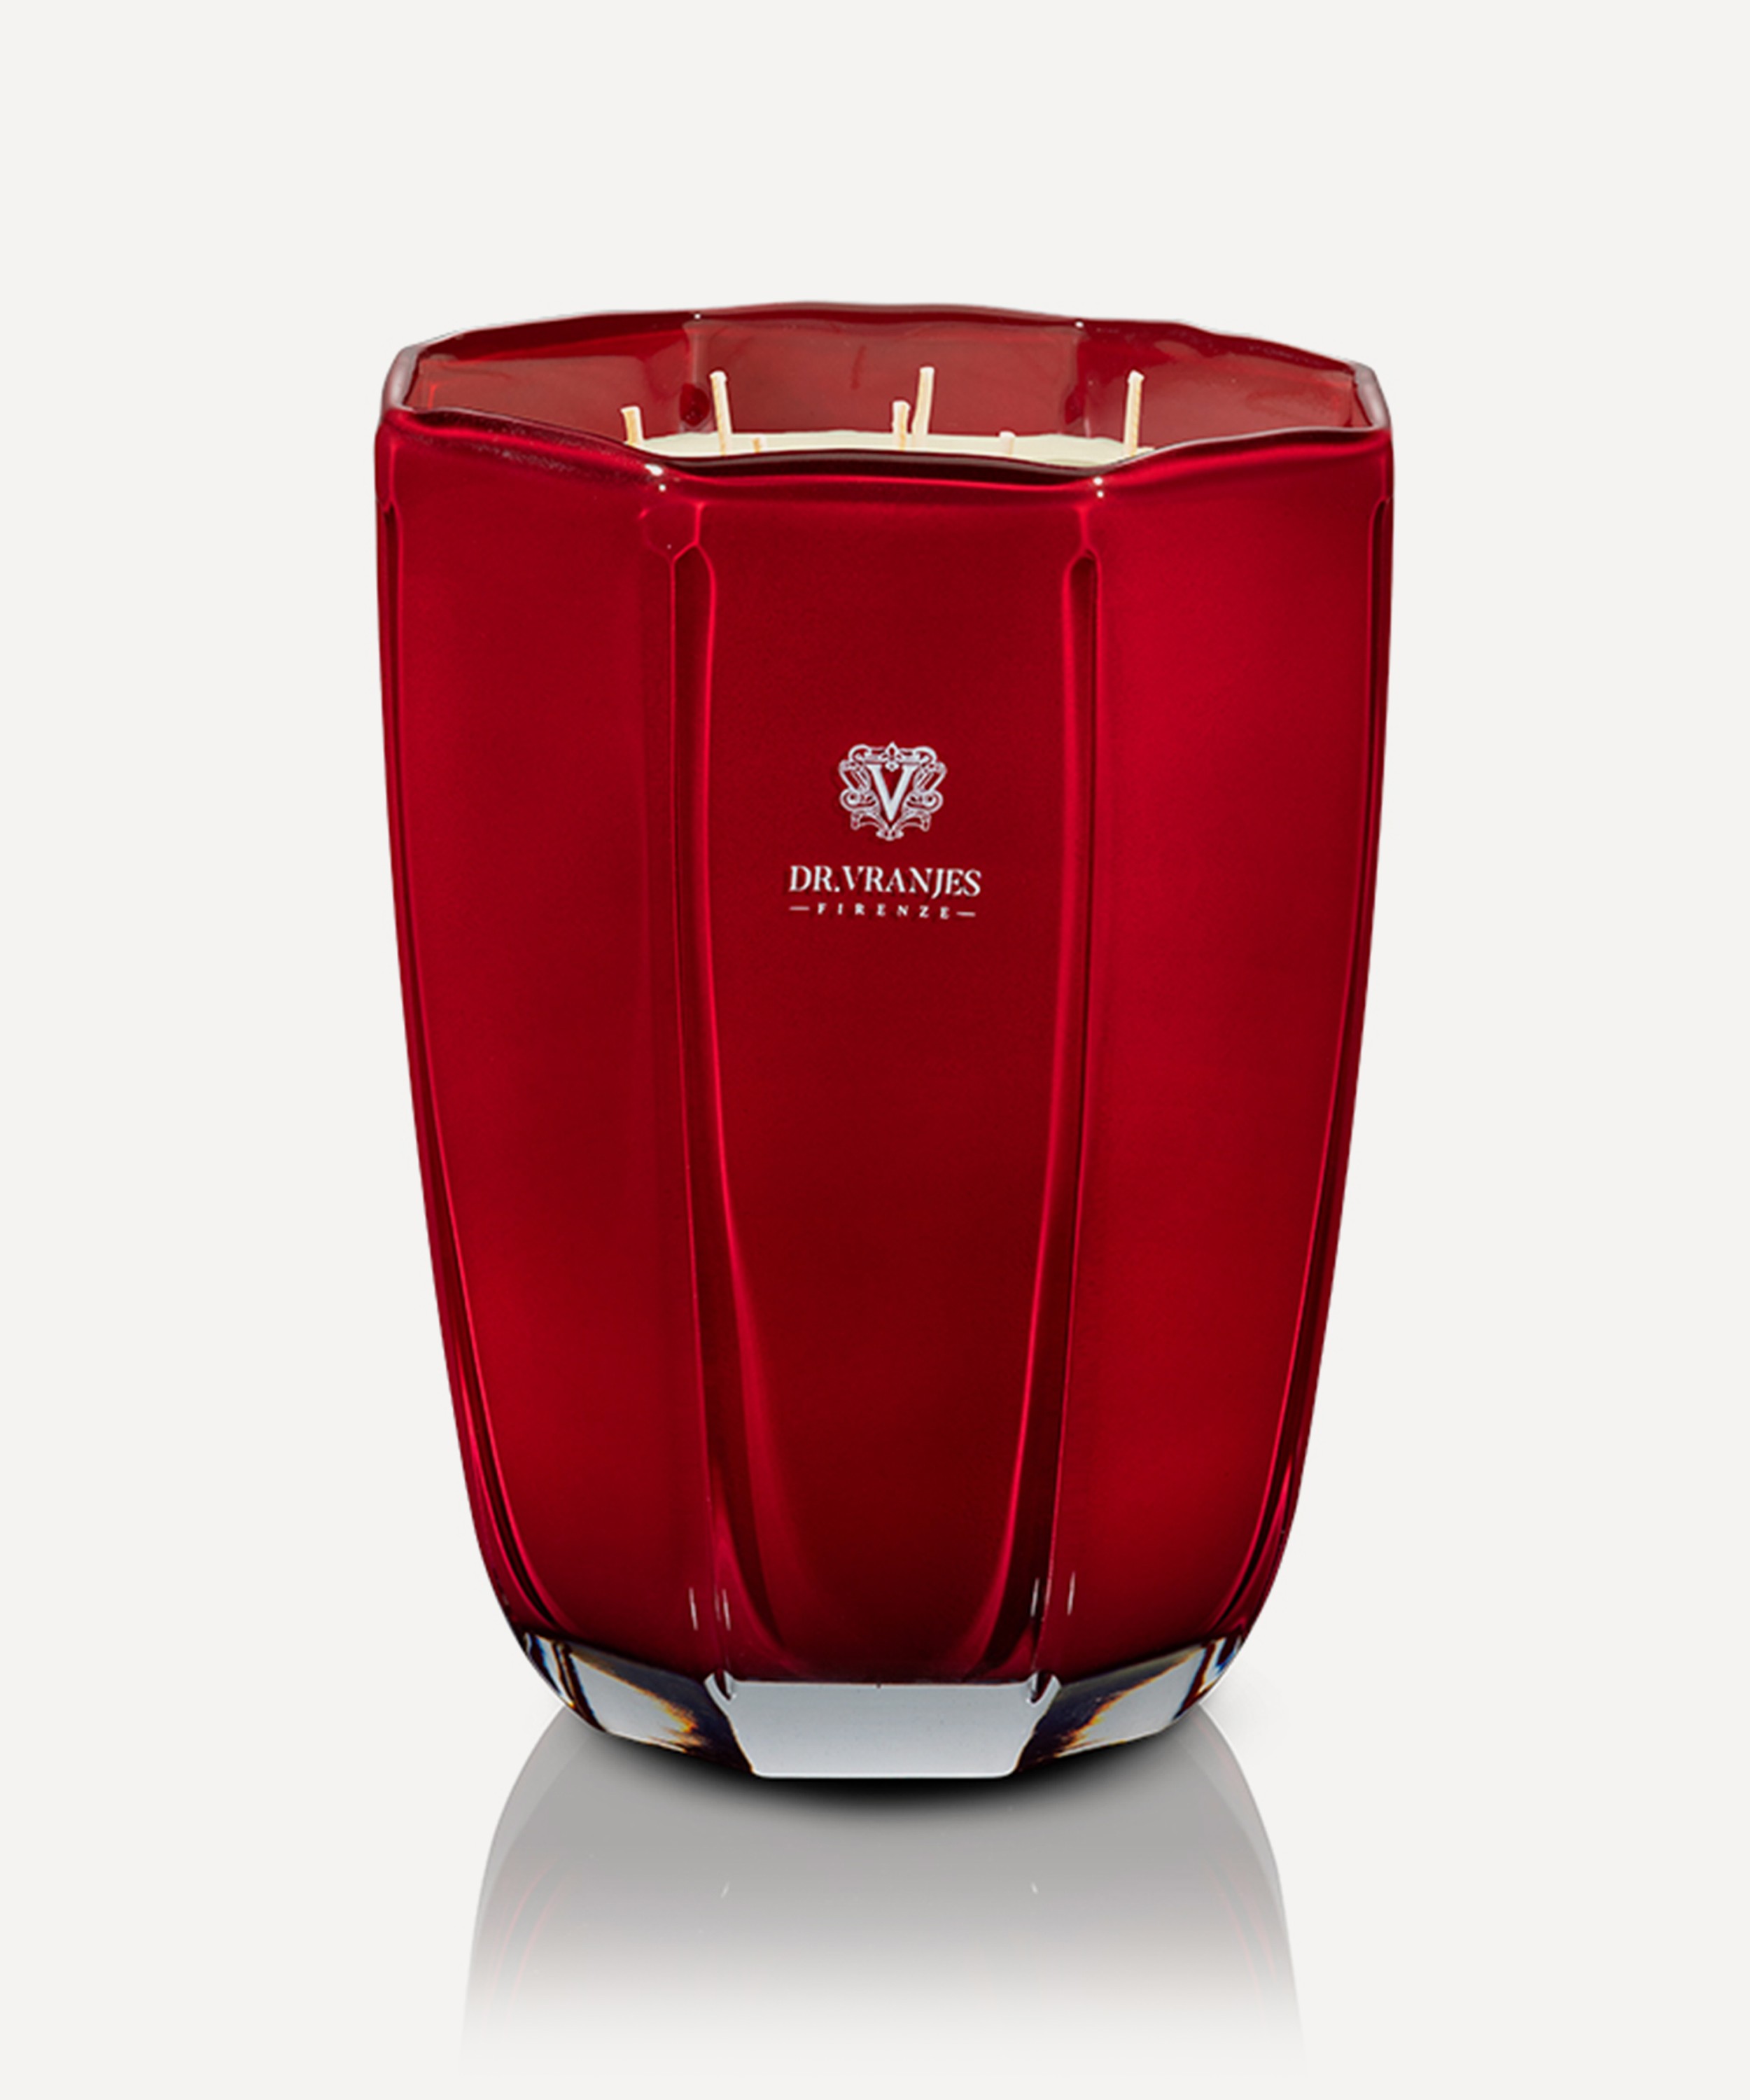 Dr Vranjes Firenze - Rosso Nobile Scented Candle 3000g